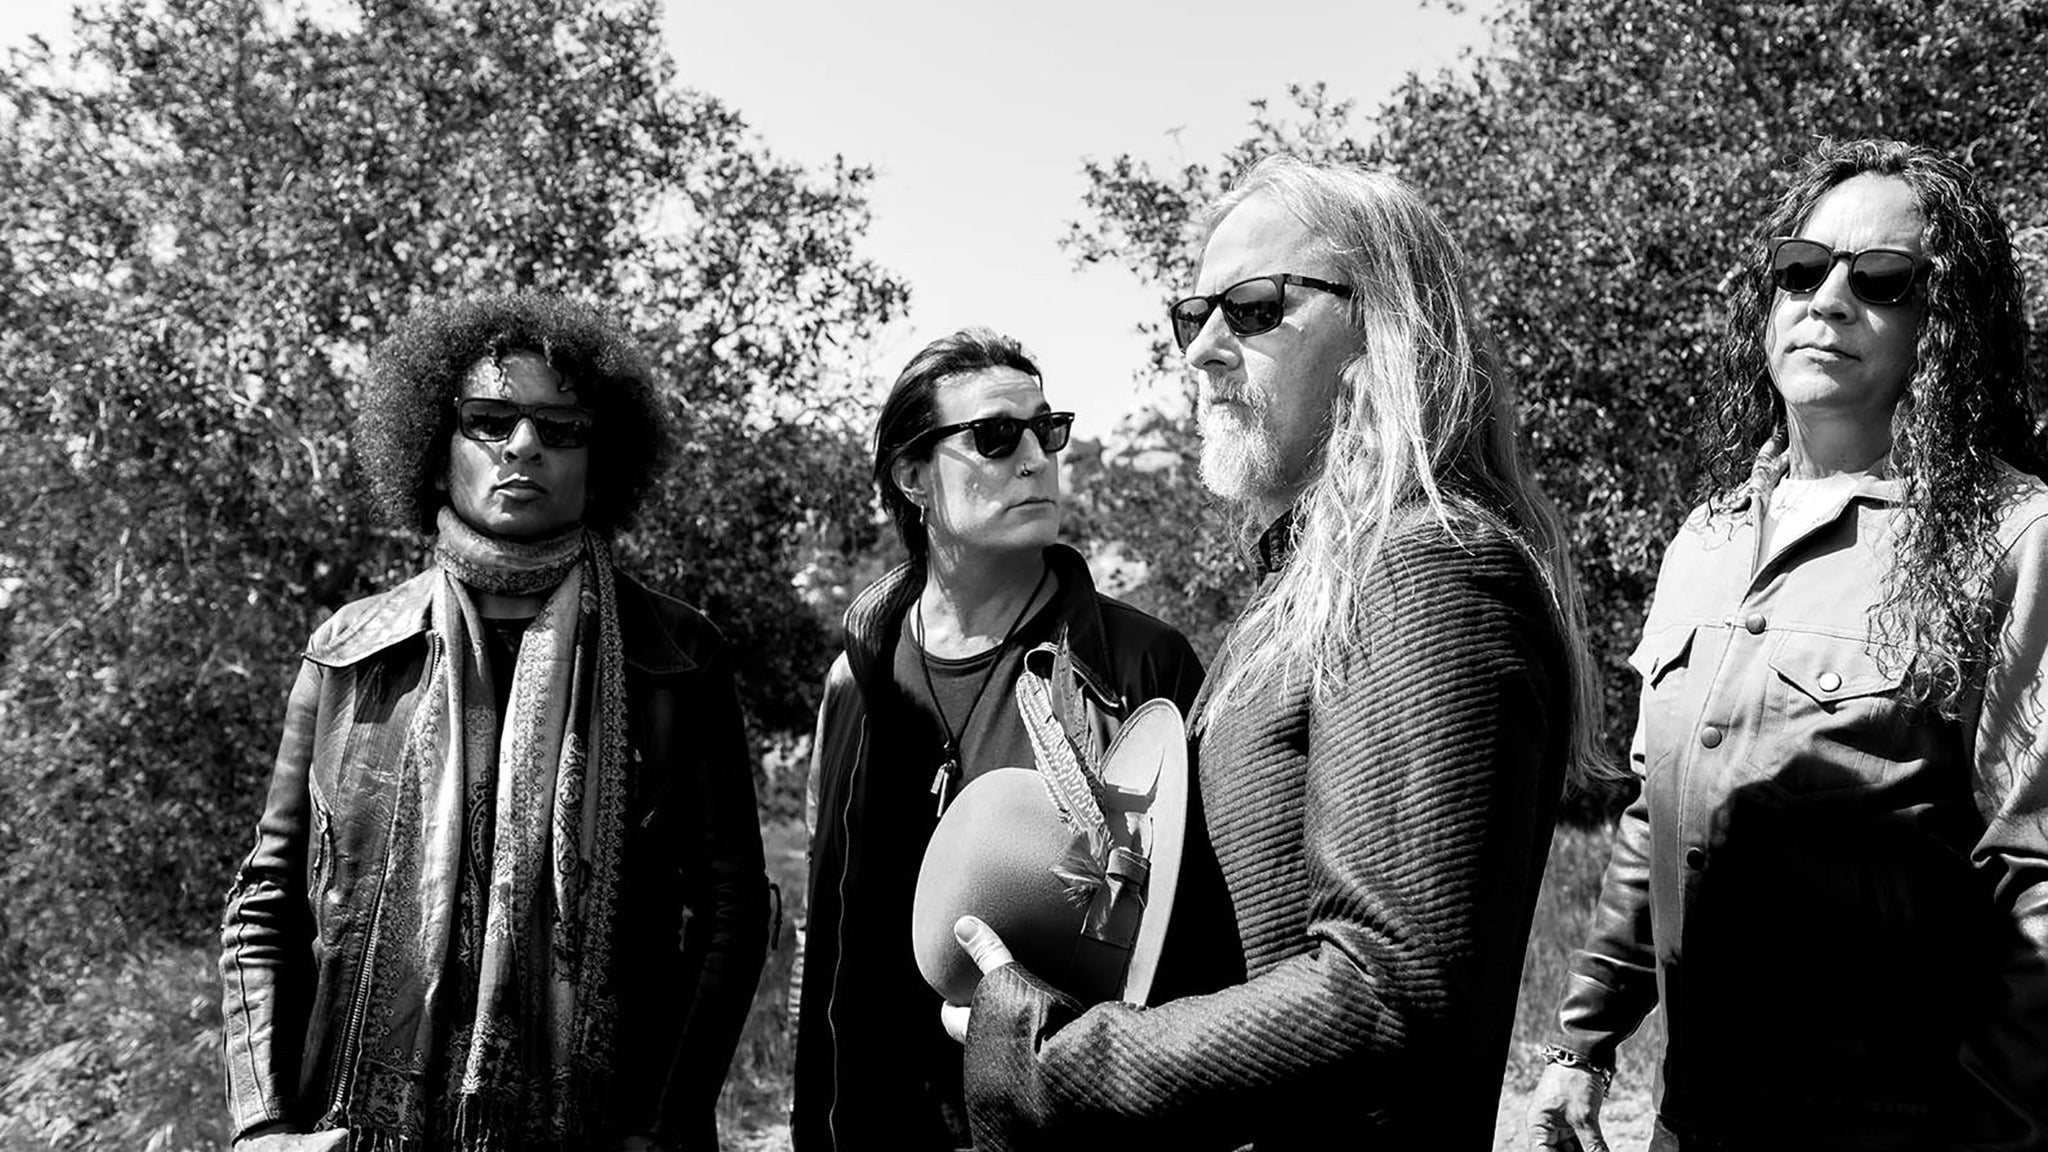 alice in chains on tour